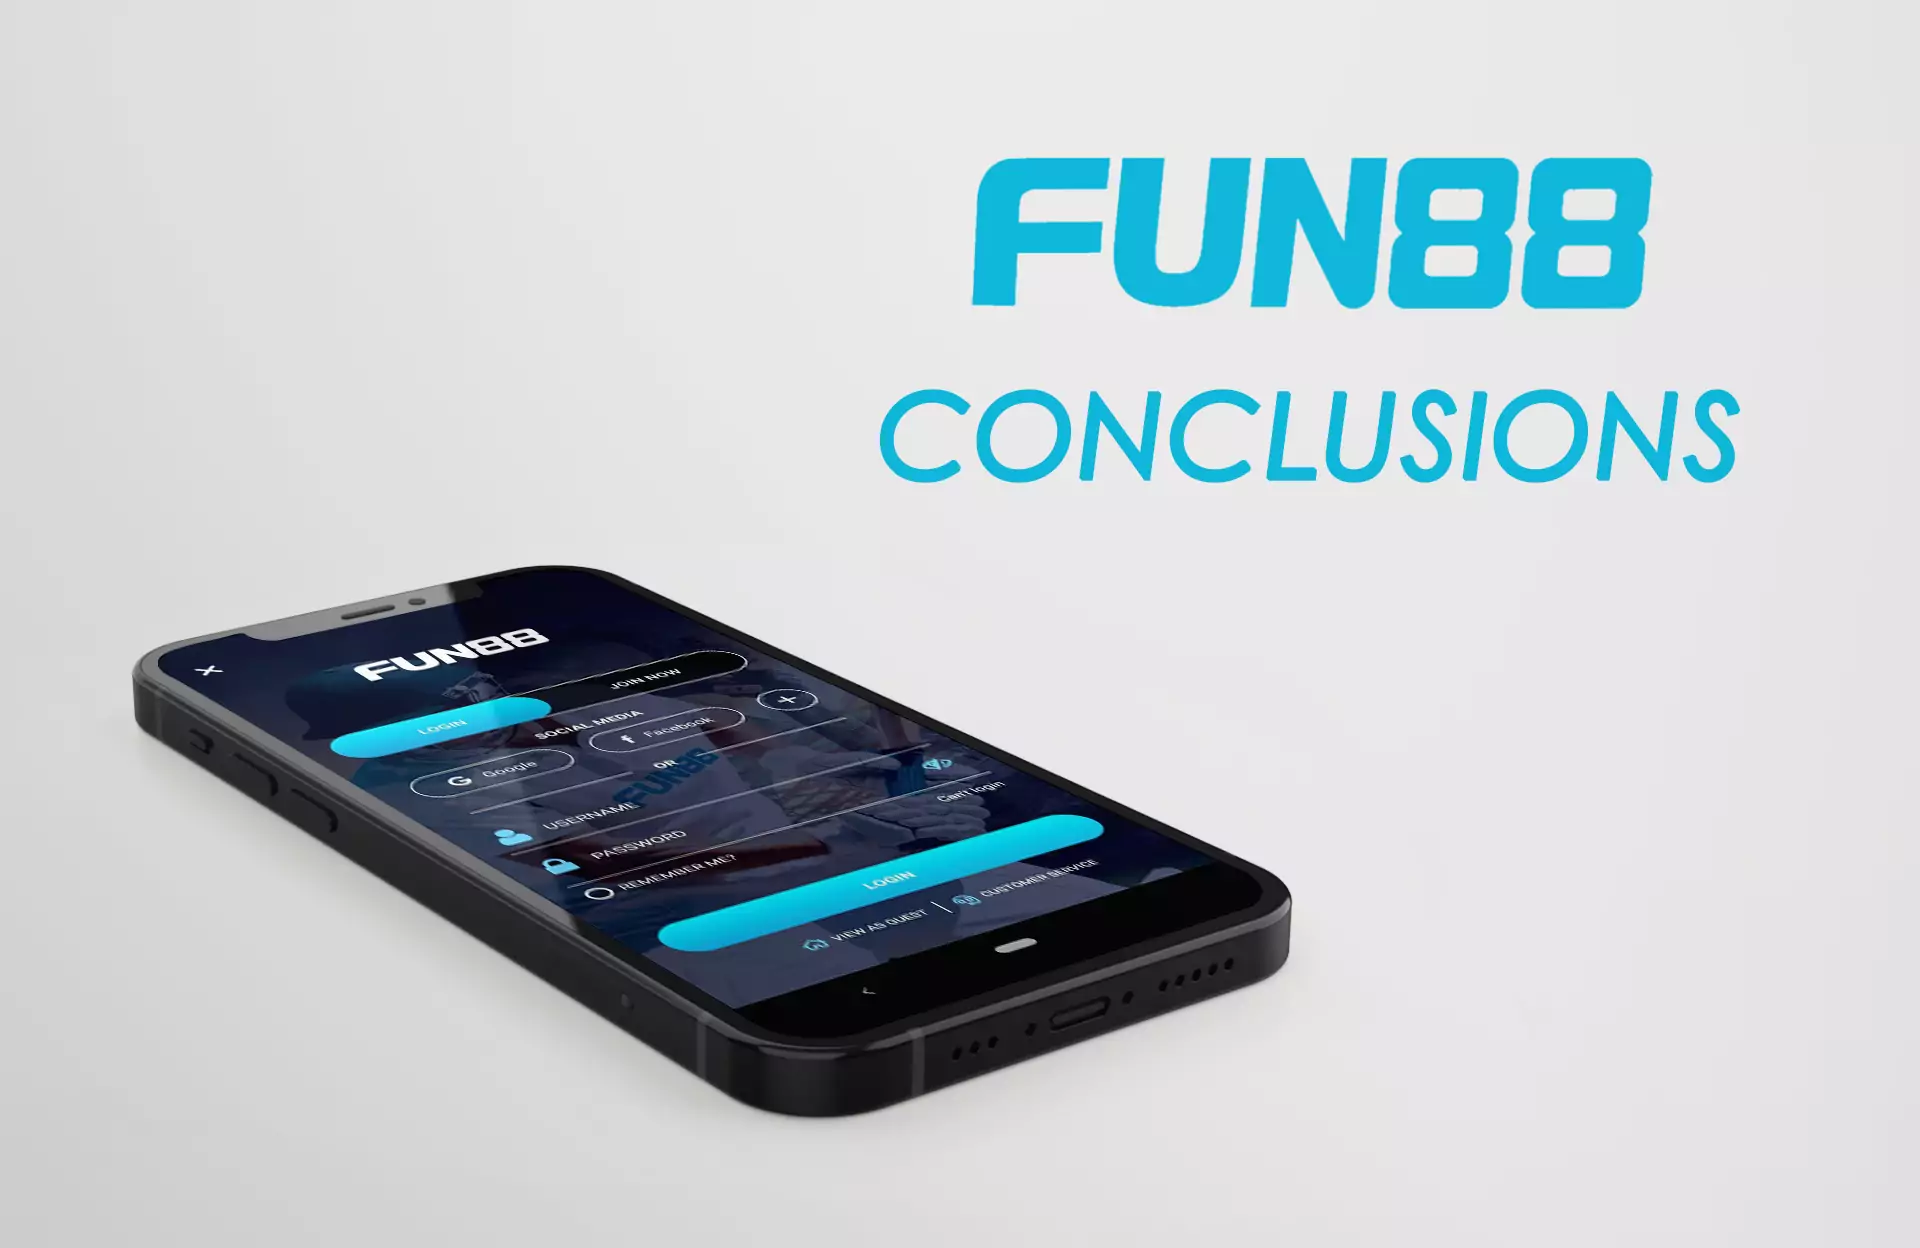 Read about the main benefits of the Fun88 app in our conclusions.